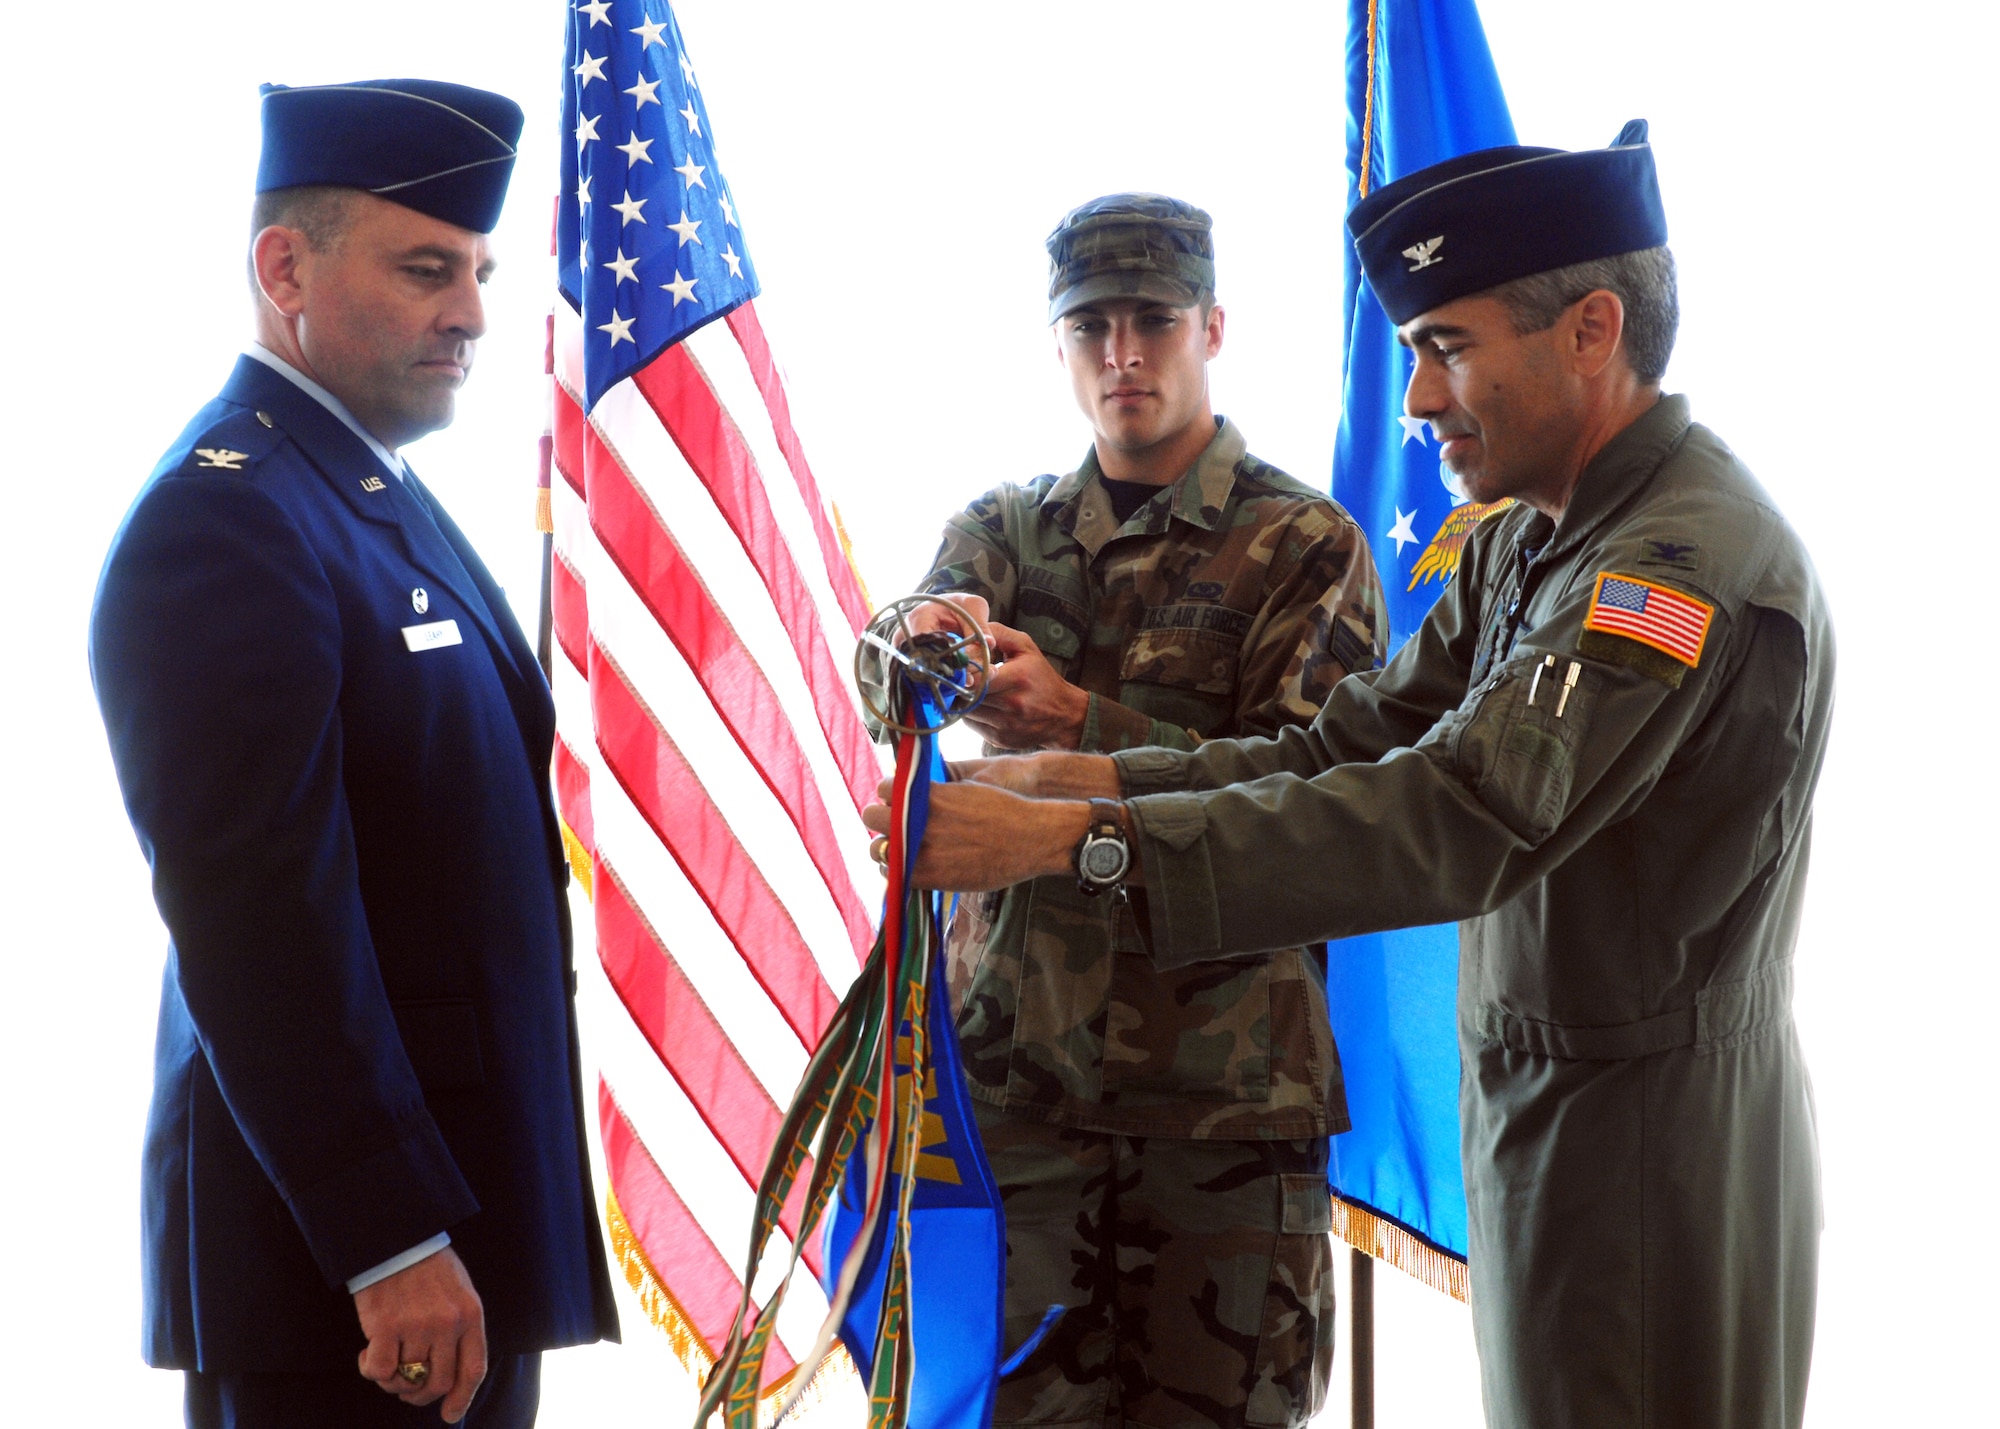 CANNON AIR FORCE BASE, N.M.-- Col. Valentino Bagnani III (right), 27th Special Operations Wing vice commander, unfurls the 318th Special Operations Squadron colors as Col. Timothy Leahy, 27th SOW commander, looks on during activation ceremonies May 16. Colonel Bagnani unfurled the colors in honor of his father, a former commander of the 318th SOS. (U.S. Air Force photo/Airman 1st Class Danielle Martin)